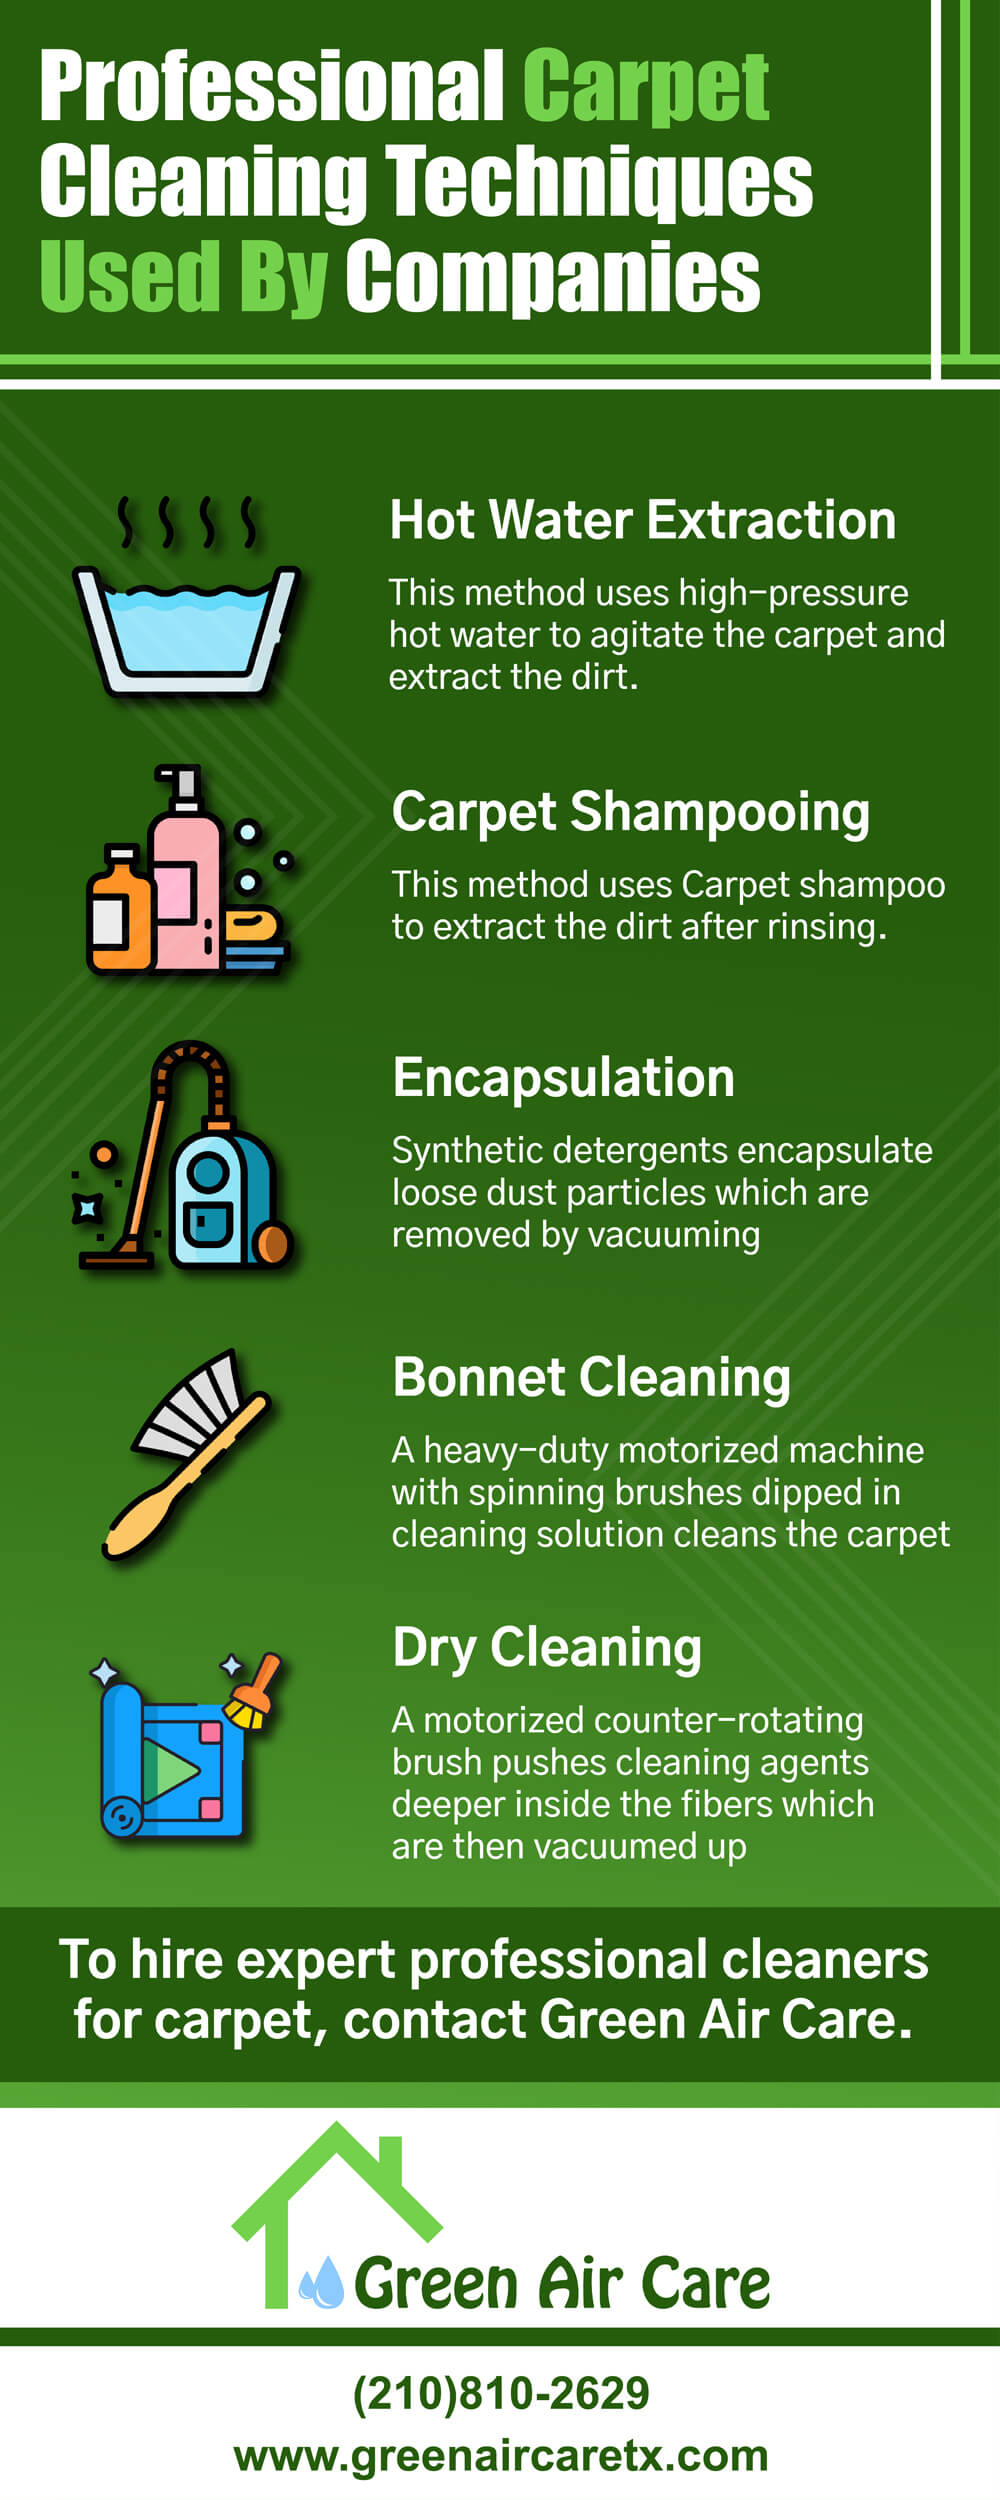 Professional Carpet Cleaning Techniques Used By Companies_